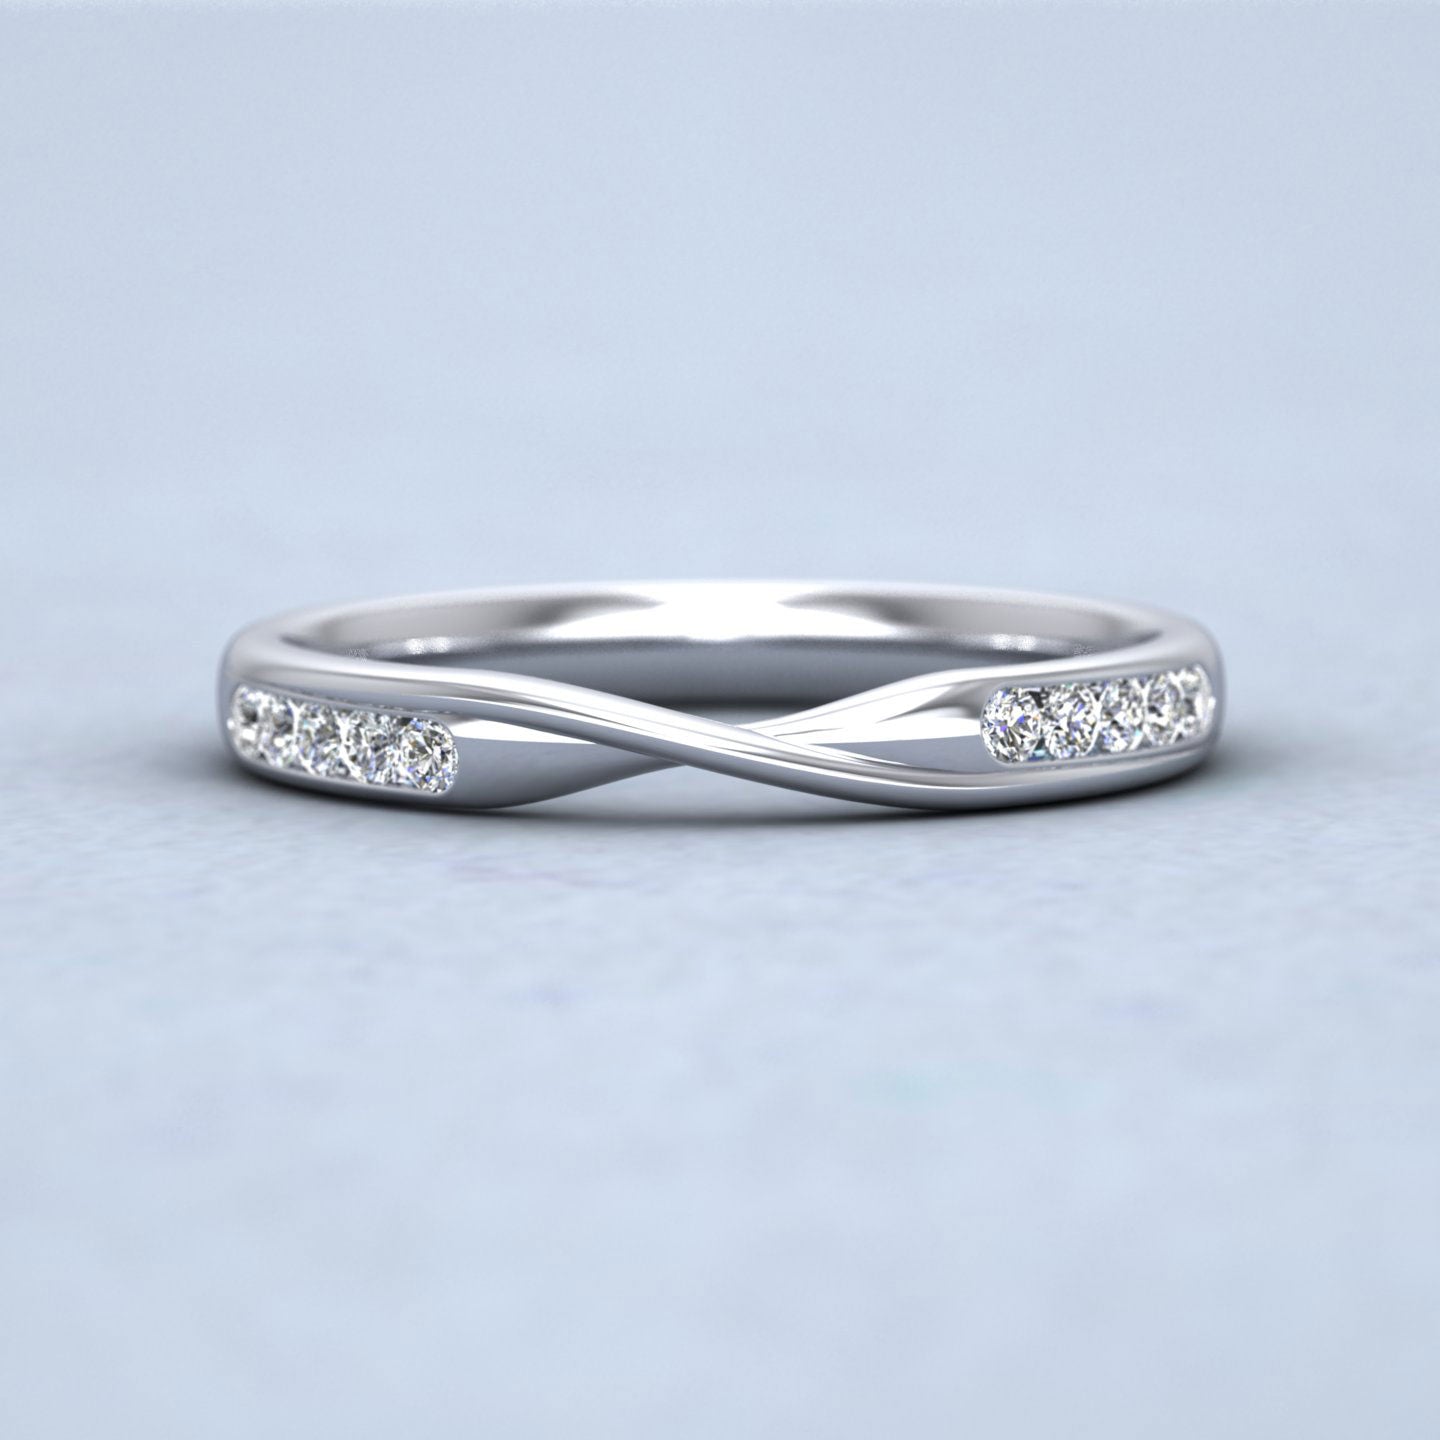 Crossover Pattern Wedding Ring In 950 Platinum 2.5mm Wide With Eight Diamonds